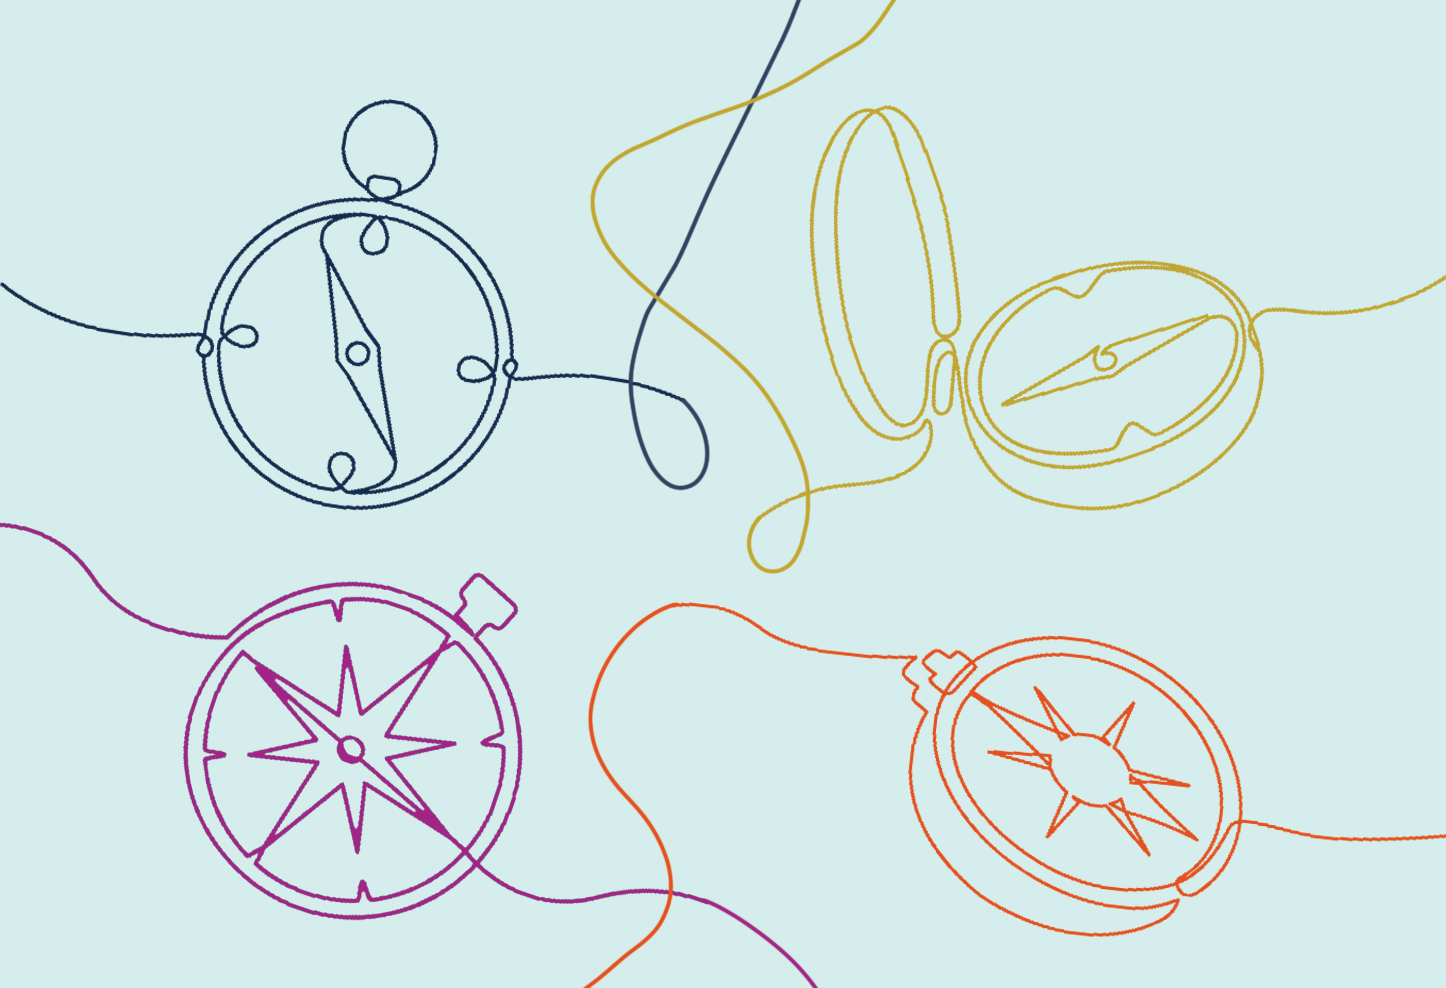 An illustration of four compasses pointed in different directions